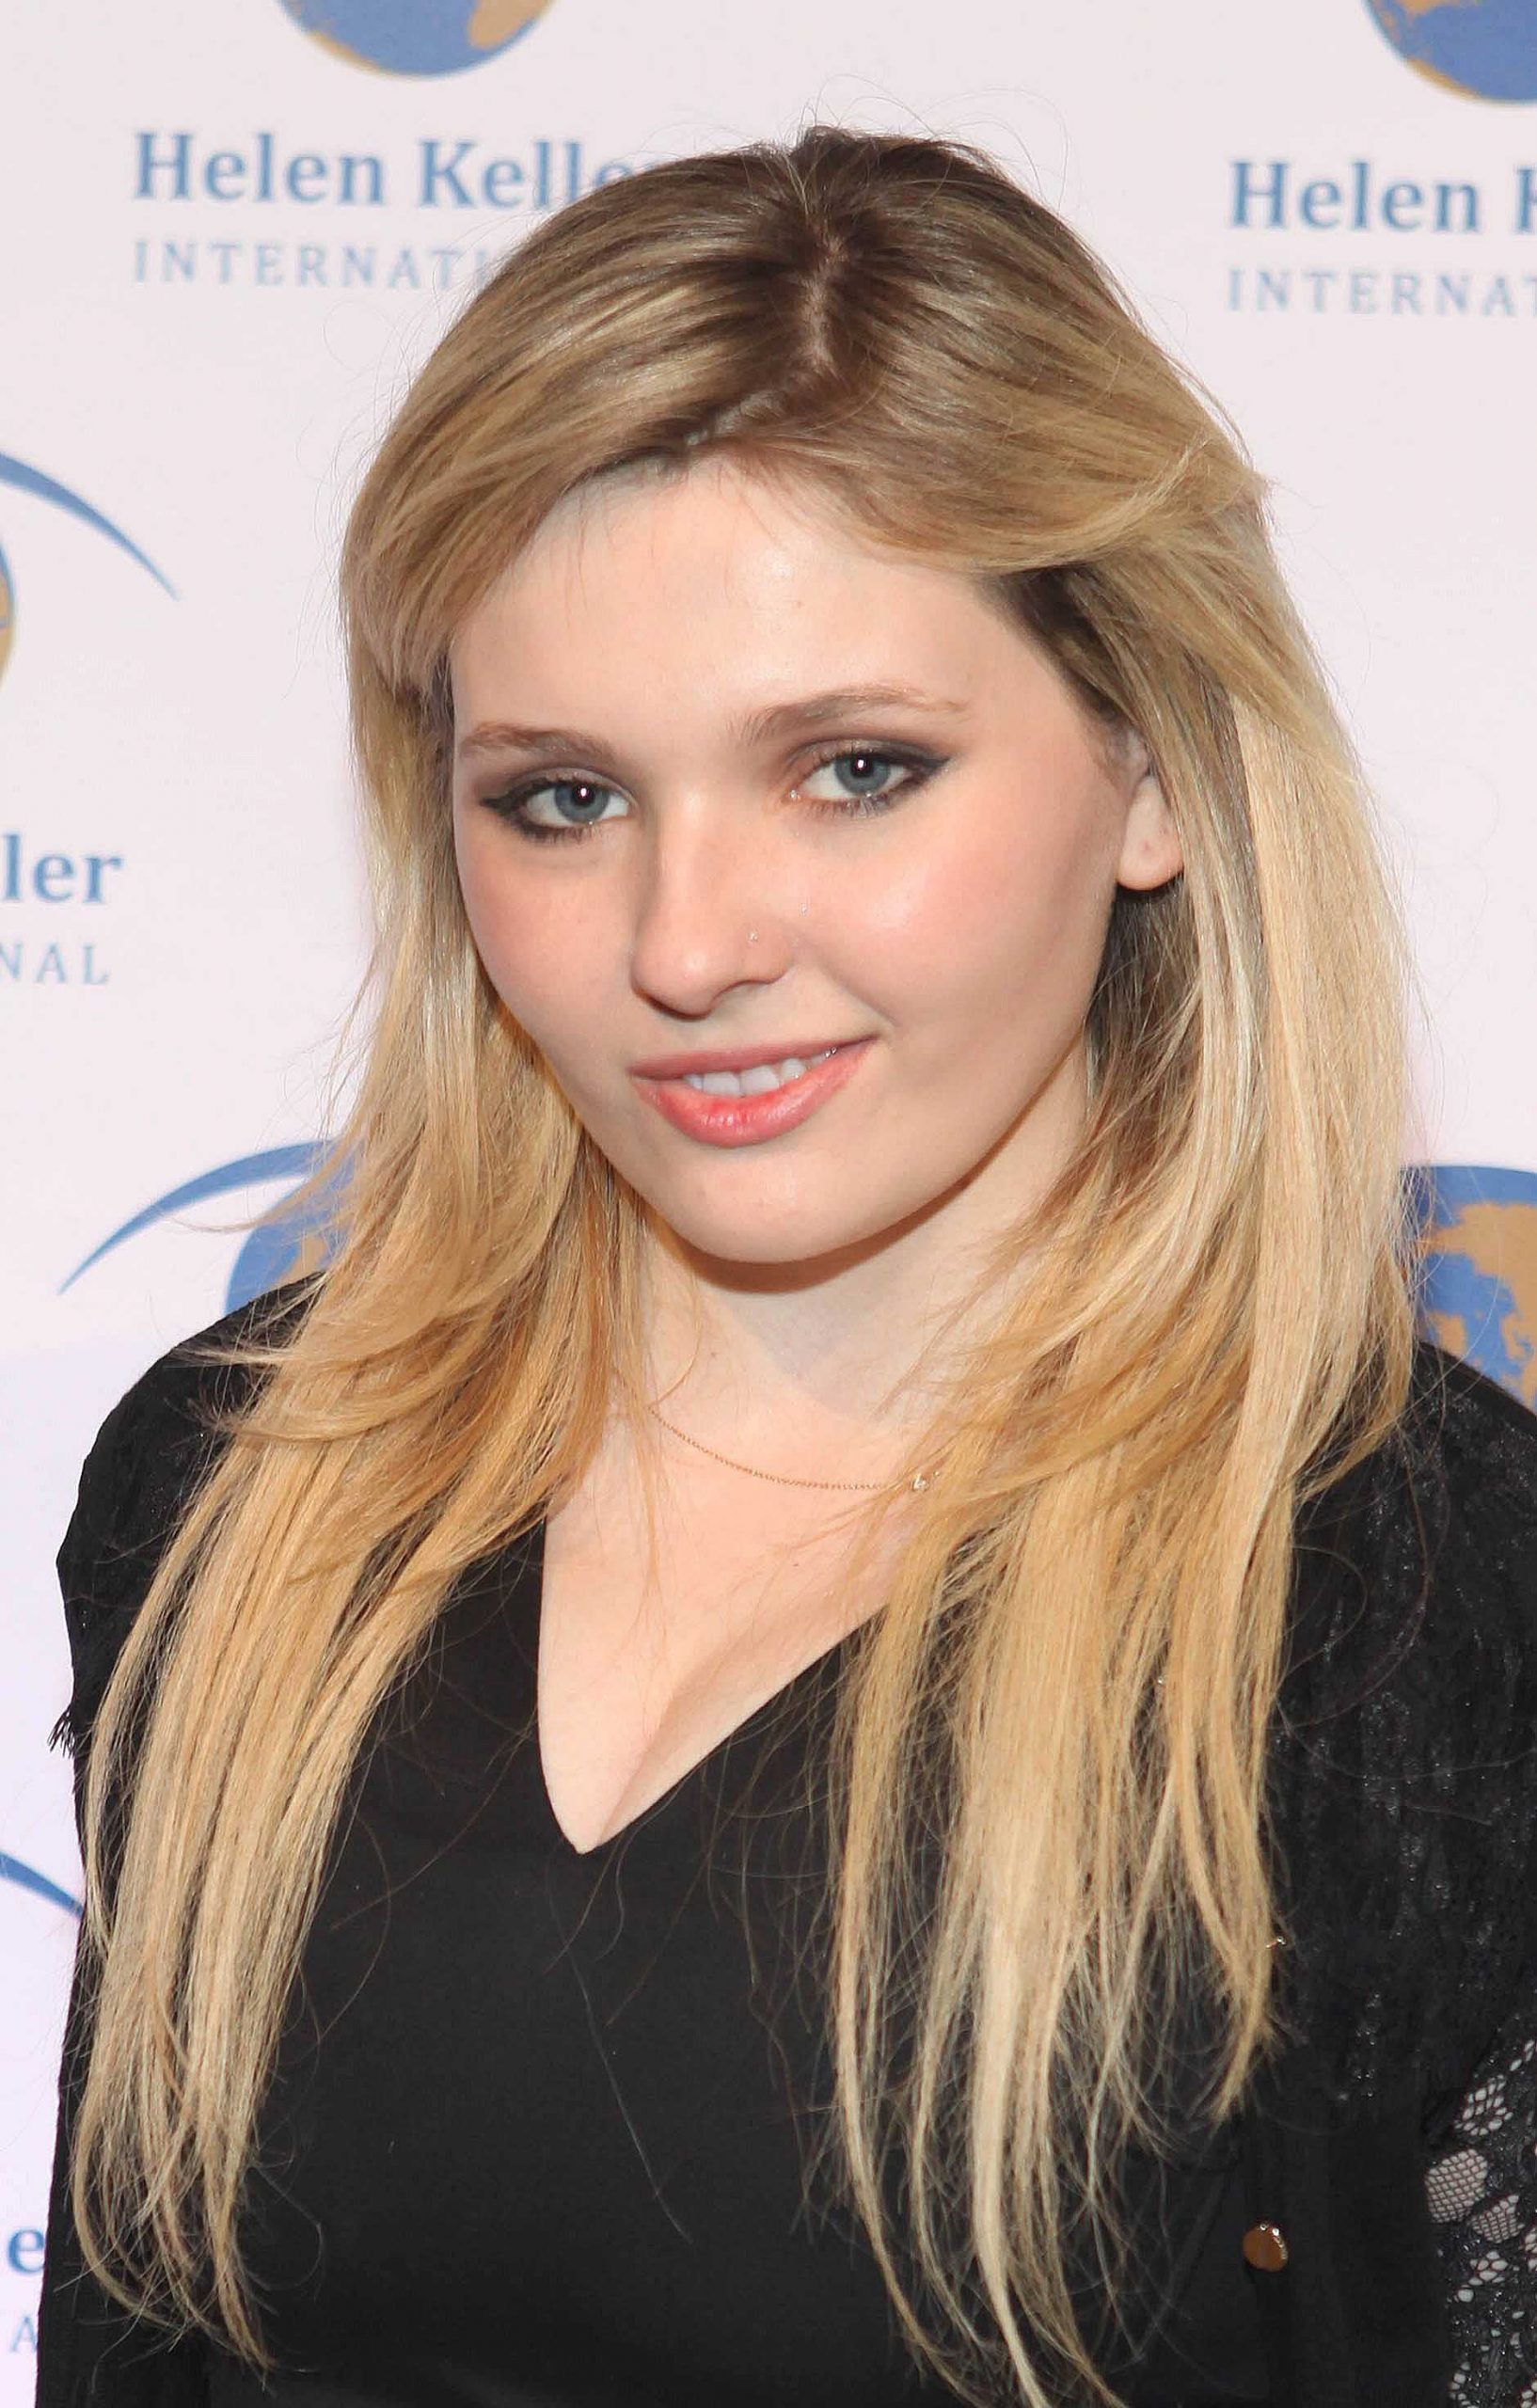 70+ Hot Pictures Of Abigail Breslin Are Epitome Of Sexiness 13